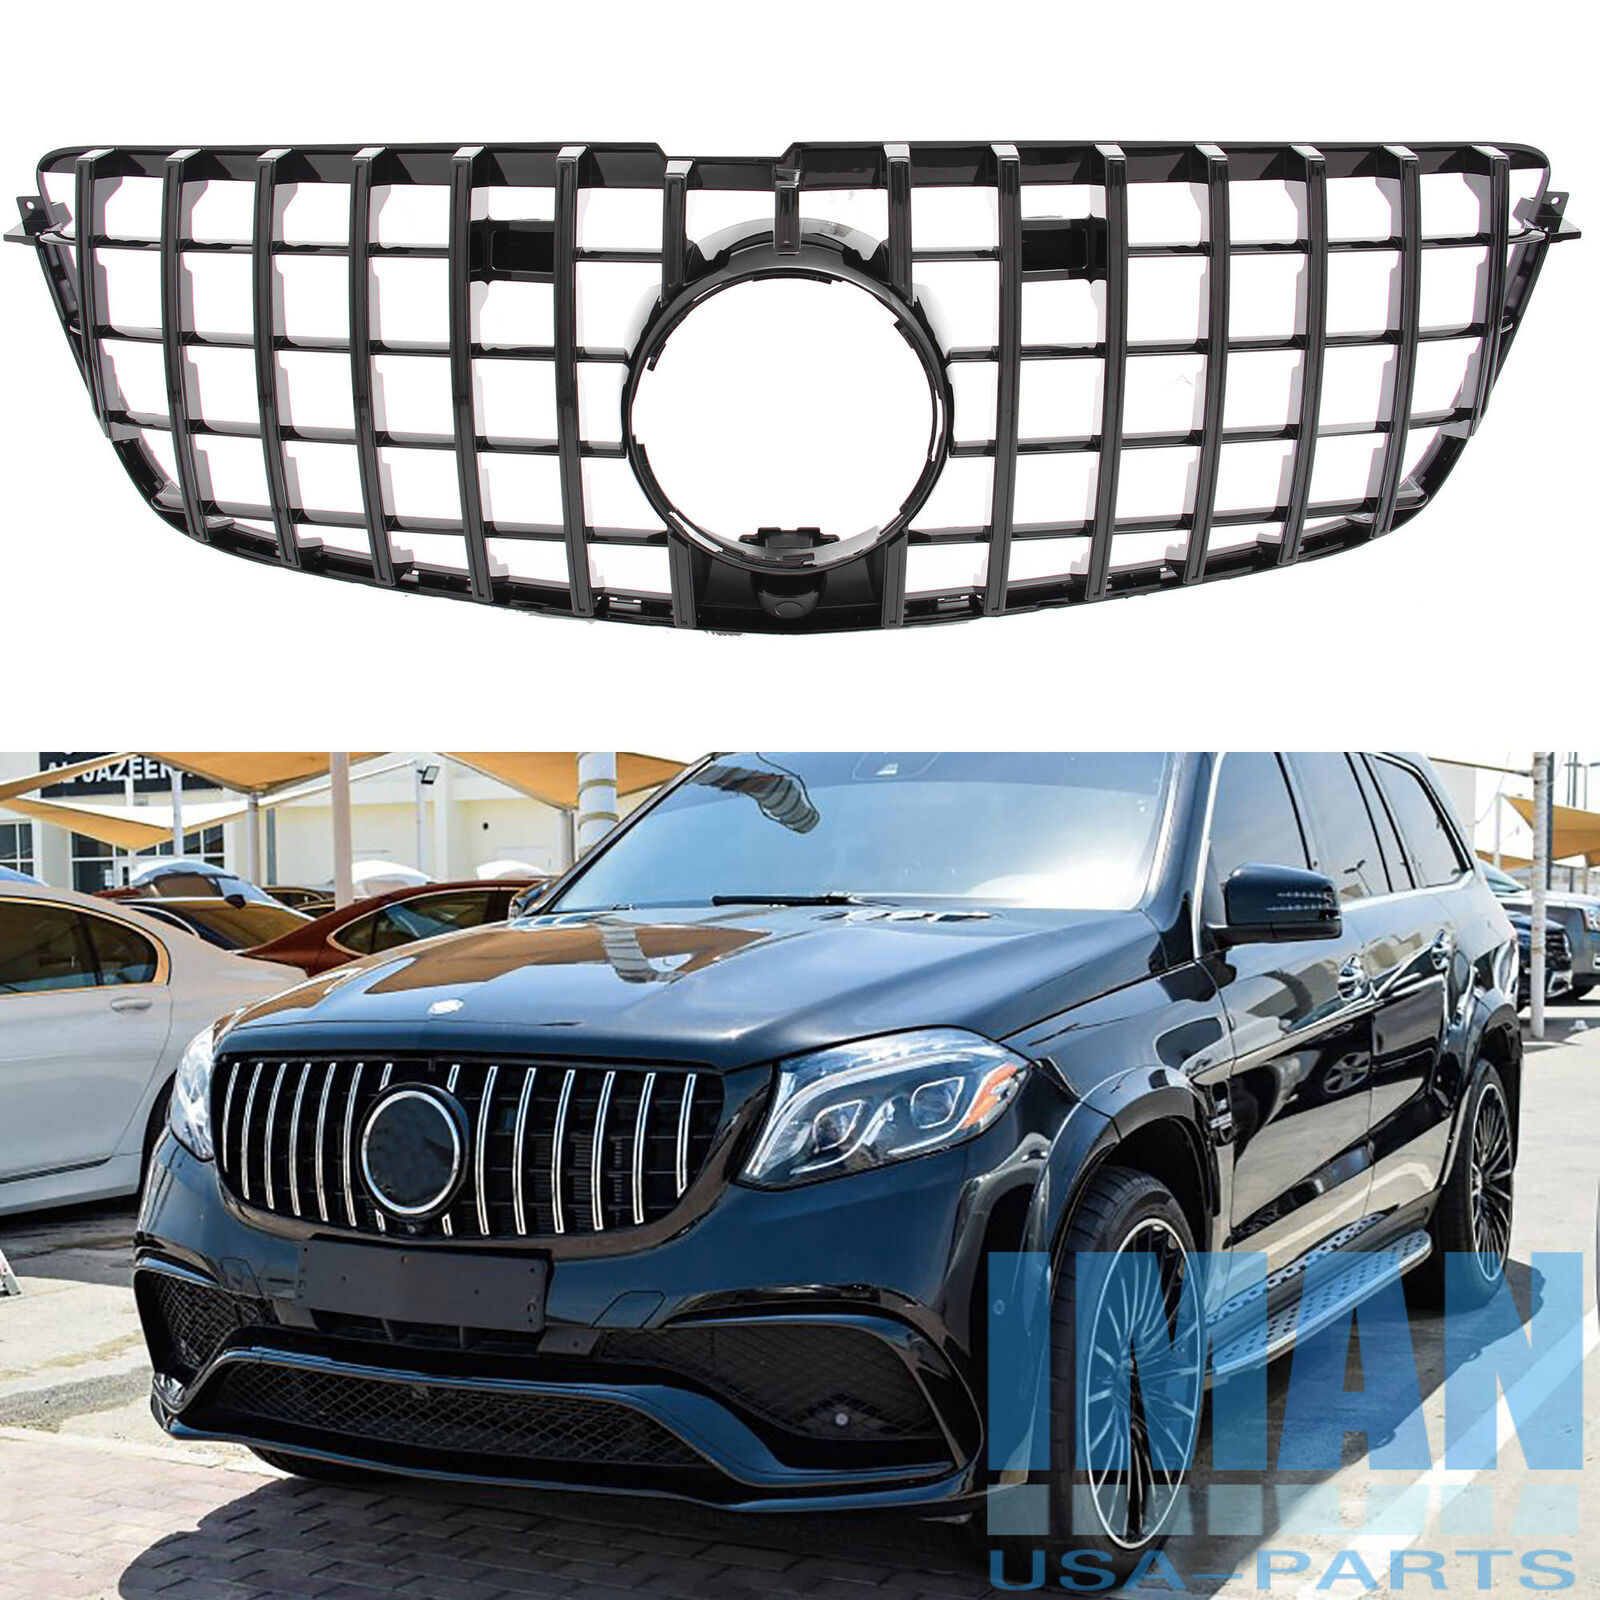 Black GT Style Grill Front Grille For Mercedes X166 GL500 GL550 GL63AMG 2013-15